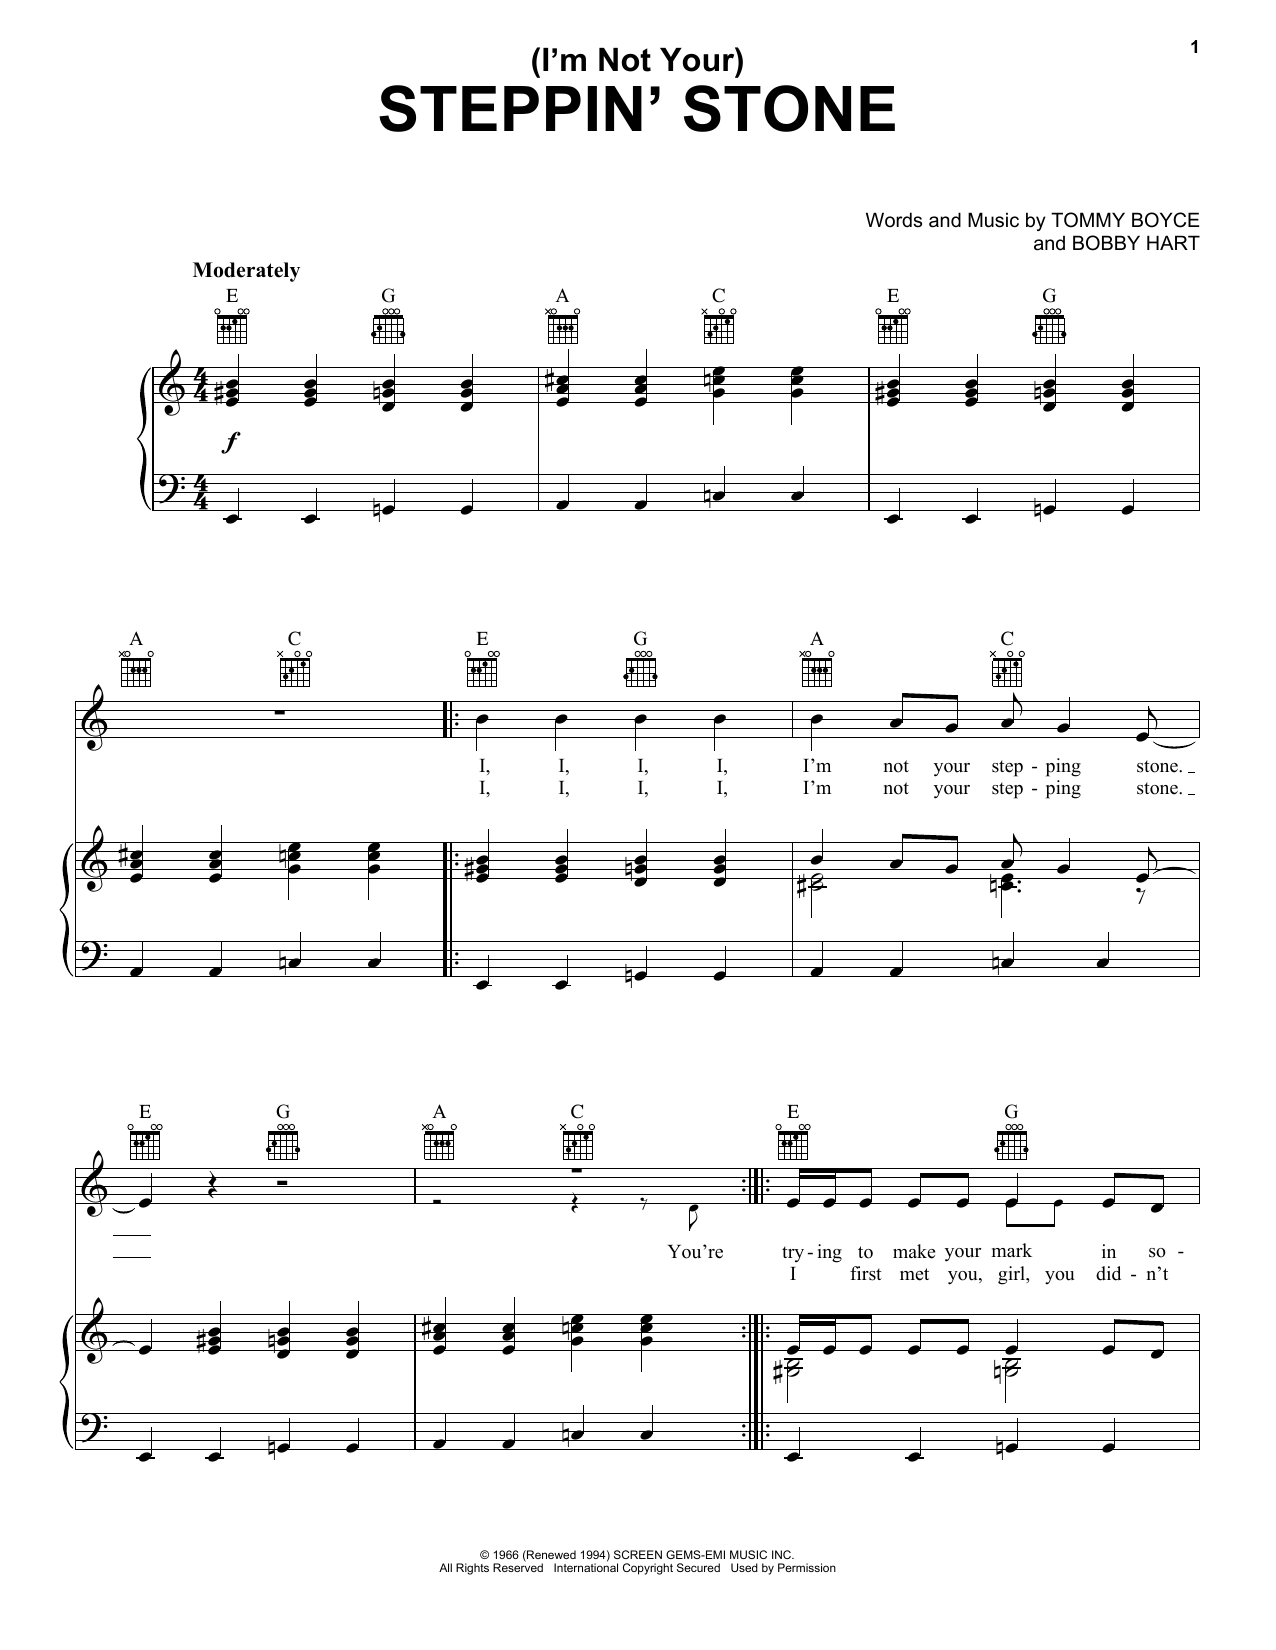 Download The Monkees (I'm Not Your) Steppin' Stone Sheet Music